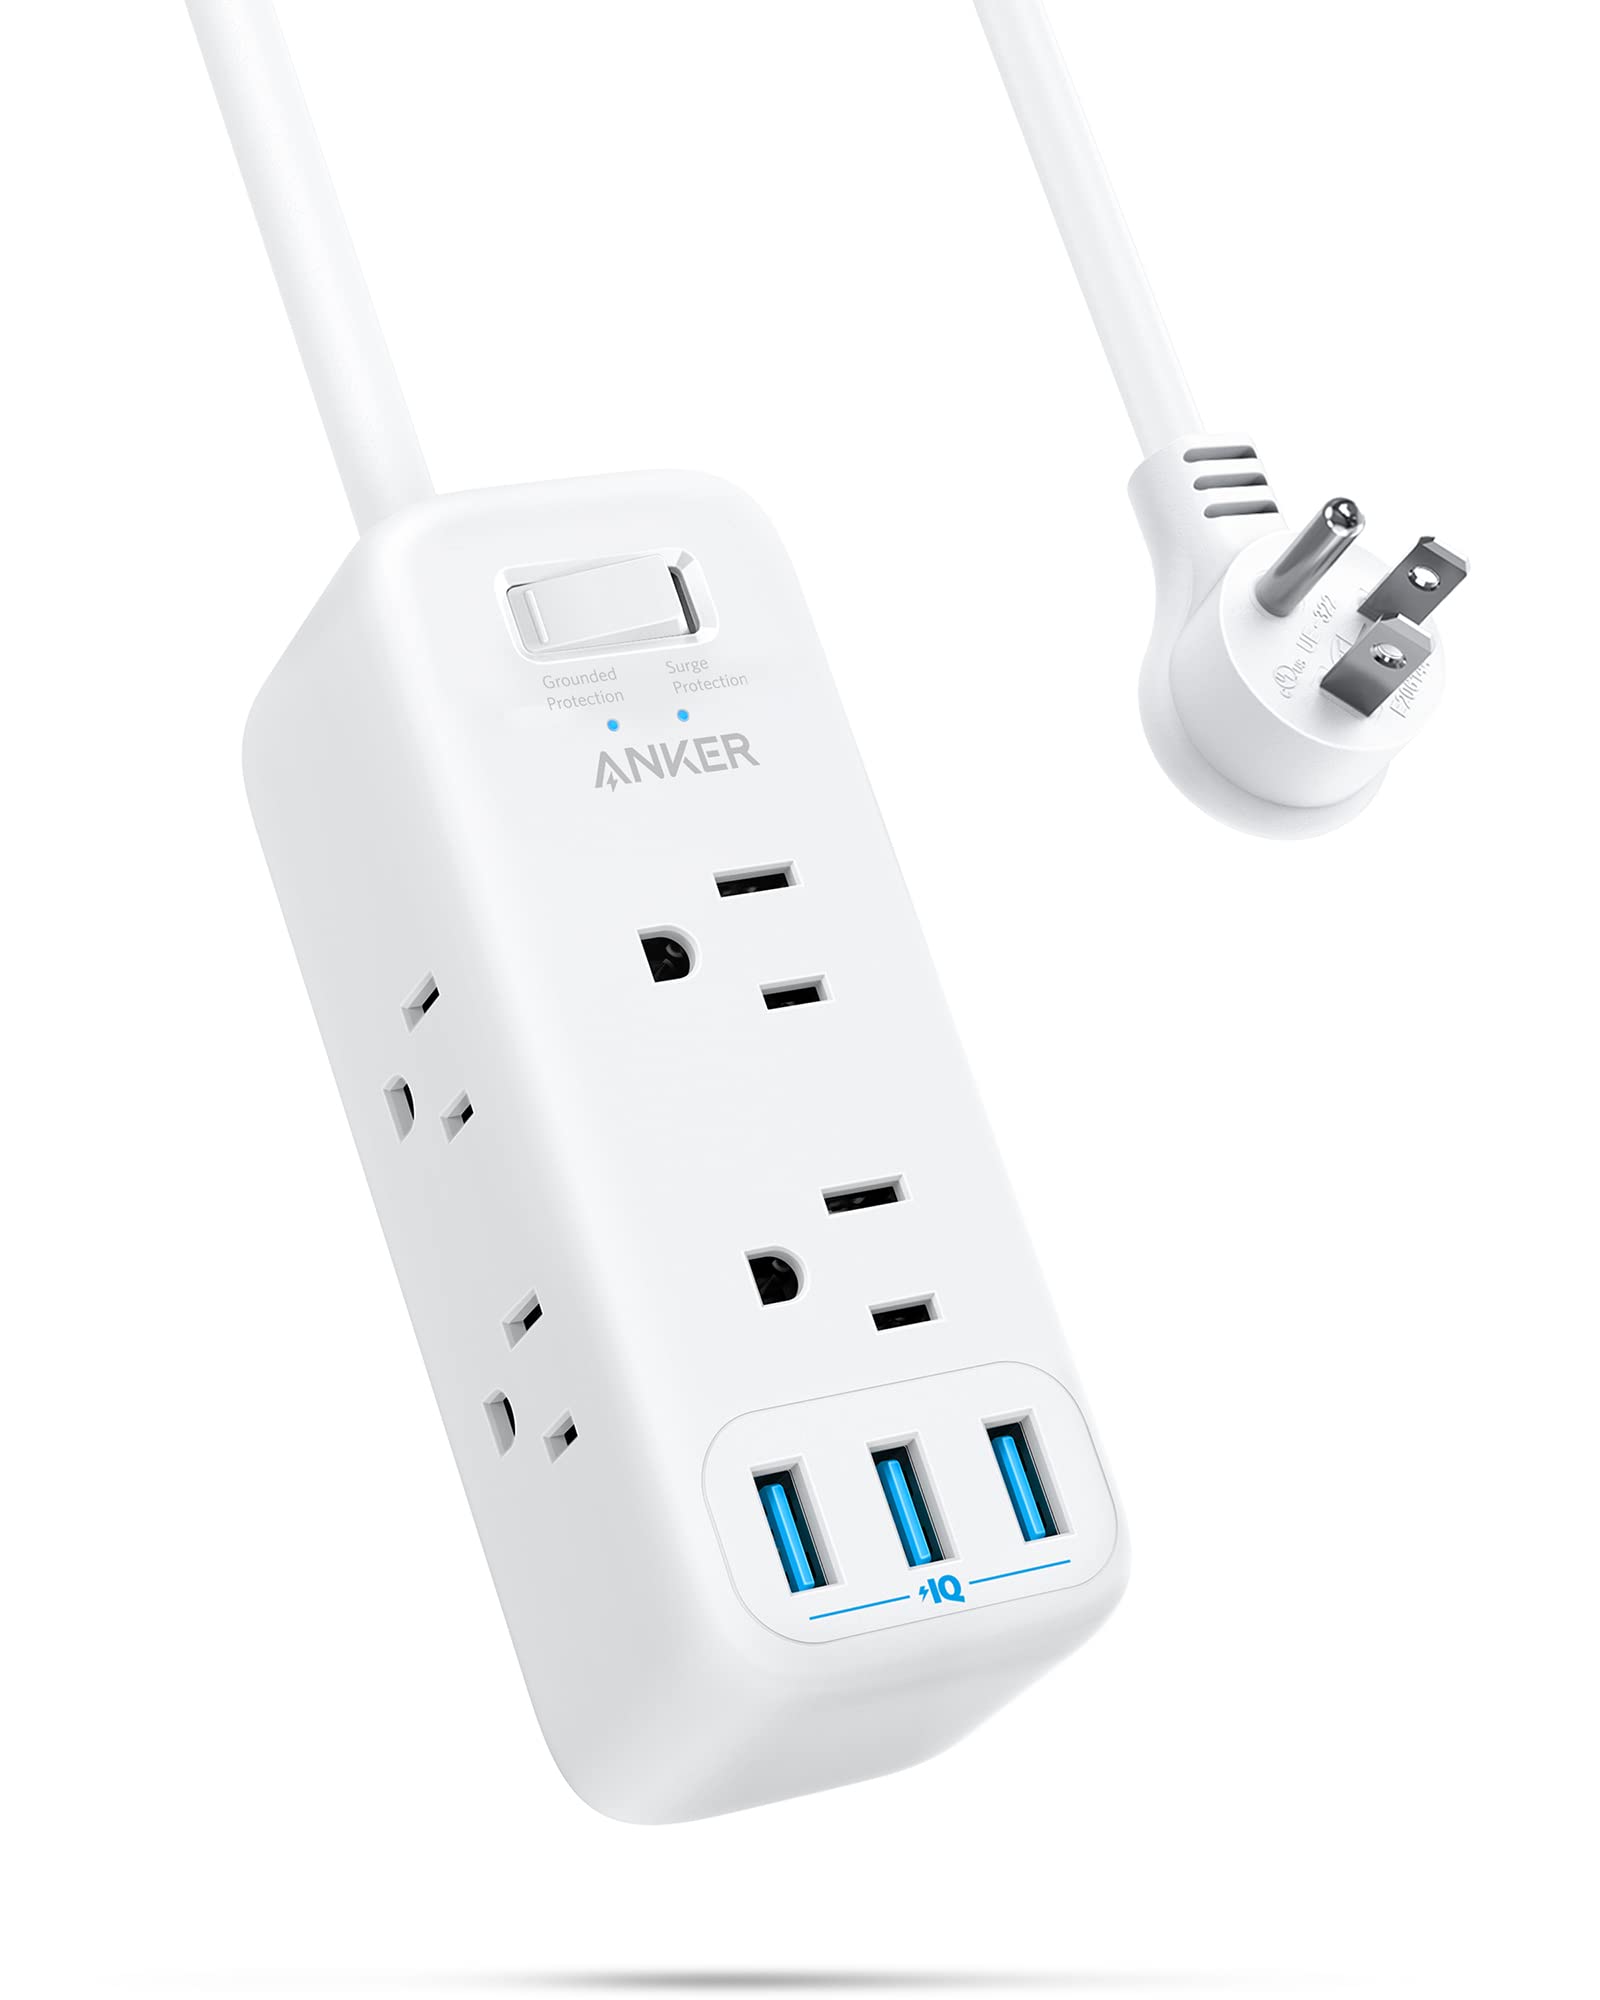 5' Anker Power Strip 300J Surge Protector w/ 6-Outlets/3x USB Ports (White) $14 + Free Shipping